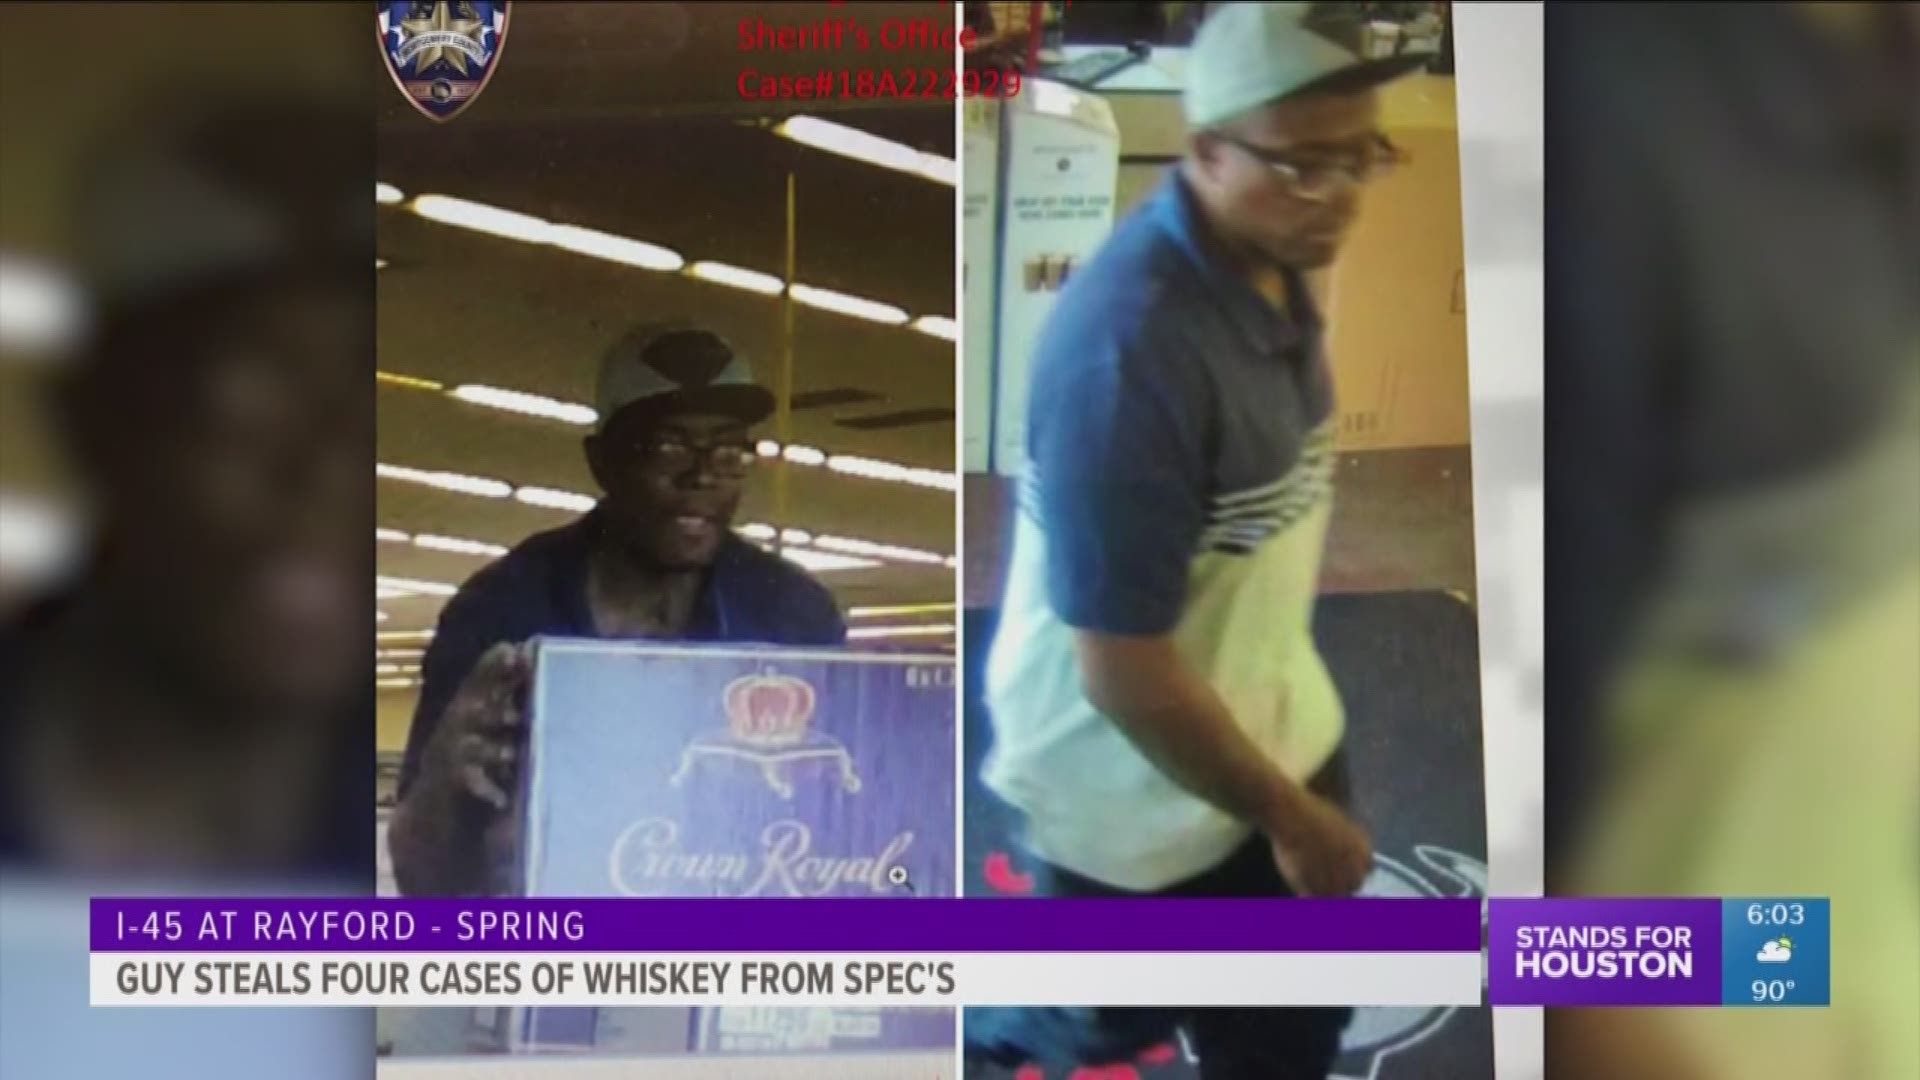 Montgomery County Sheriff's deputies are searching for a suspect they say took several bottles of whisky from a Spec's store in Spring.